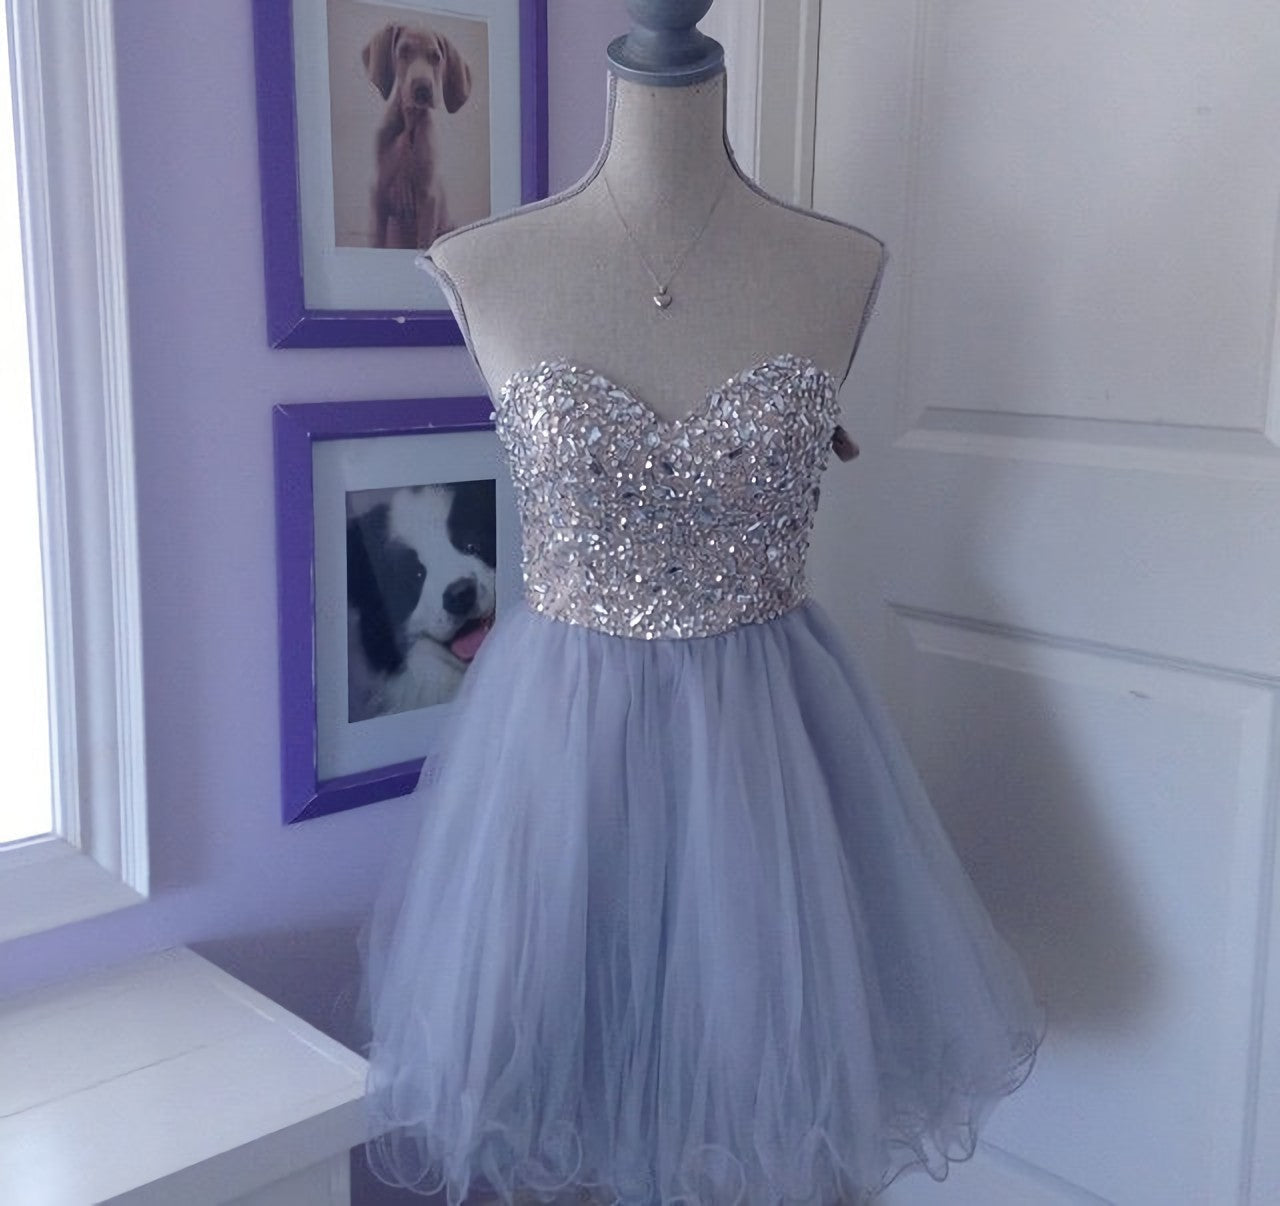 Party Dresses For Babies, Sweeetheart Tulle Beaded Short Sweet 16 Homecoming Dresses